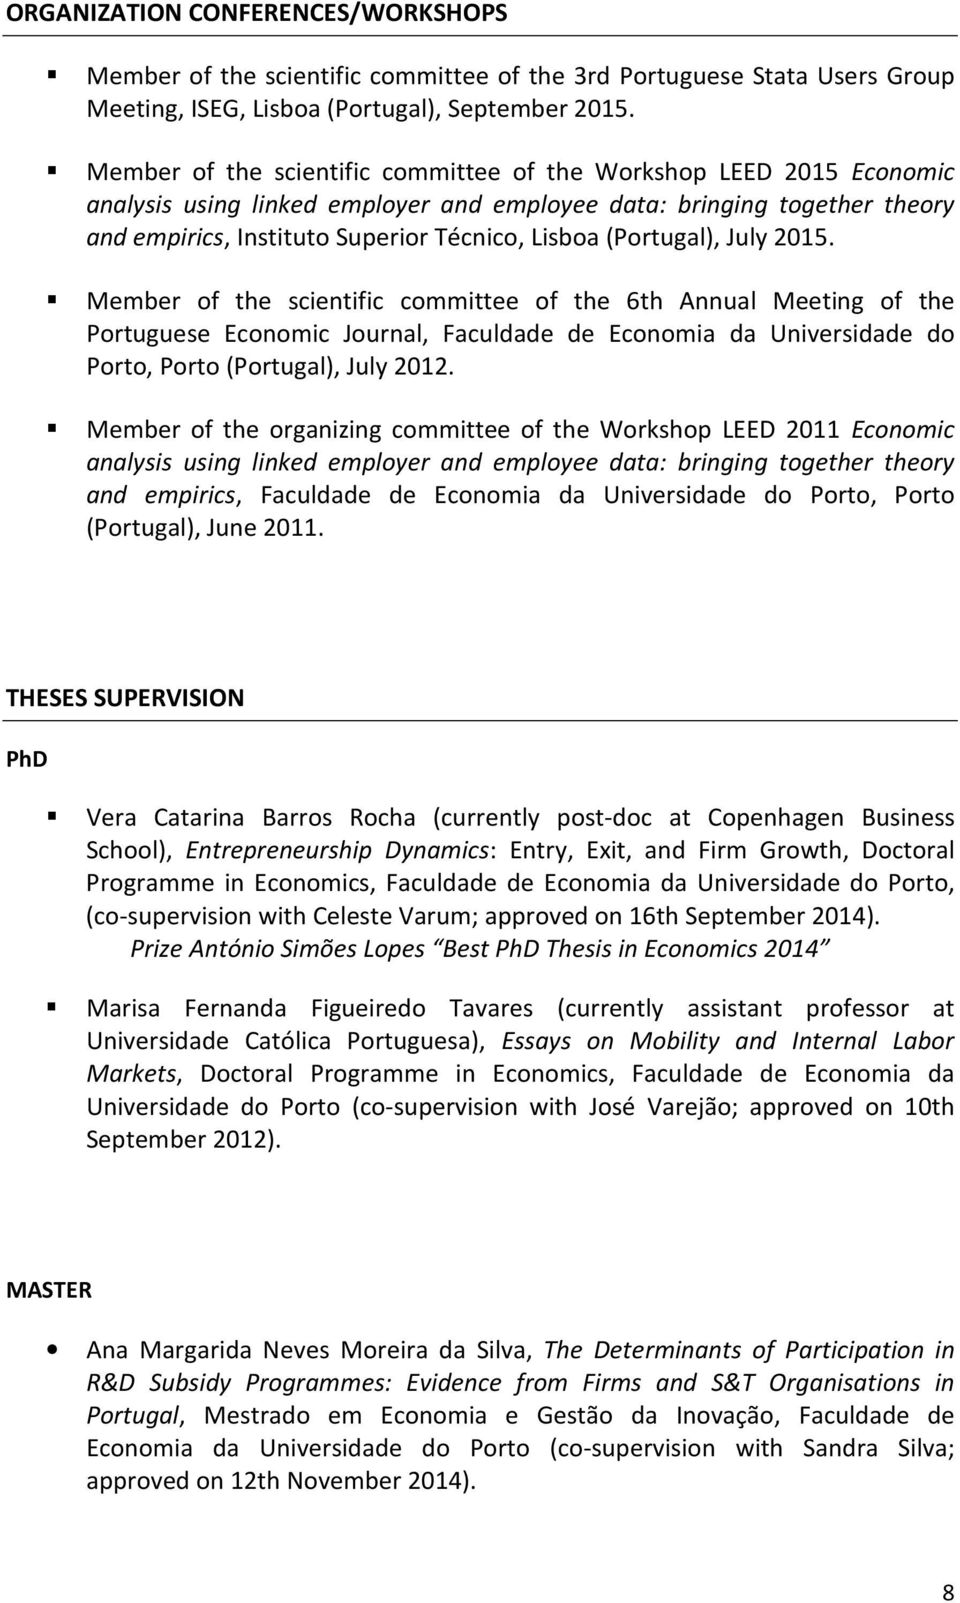 (Portugal), July 2015. Member of the scientific committee of the 6th Annual Meeting of the Portuguese Economic Journal, Faculdade de Economia da Universidade do Porto, Porto (Portugal), July 2012.